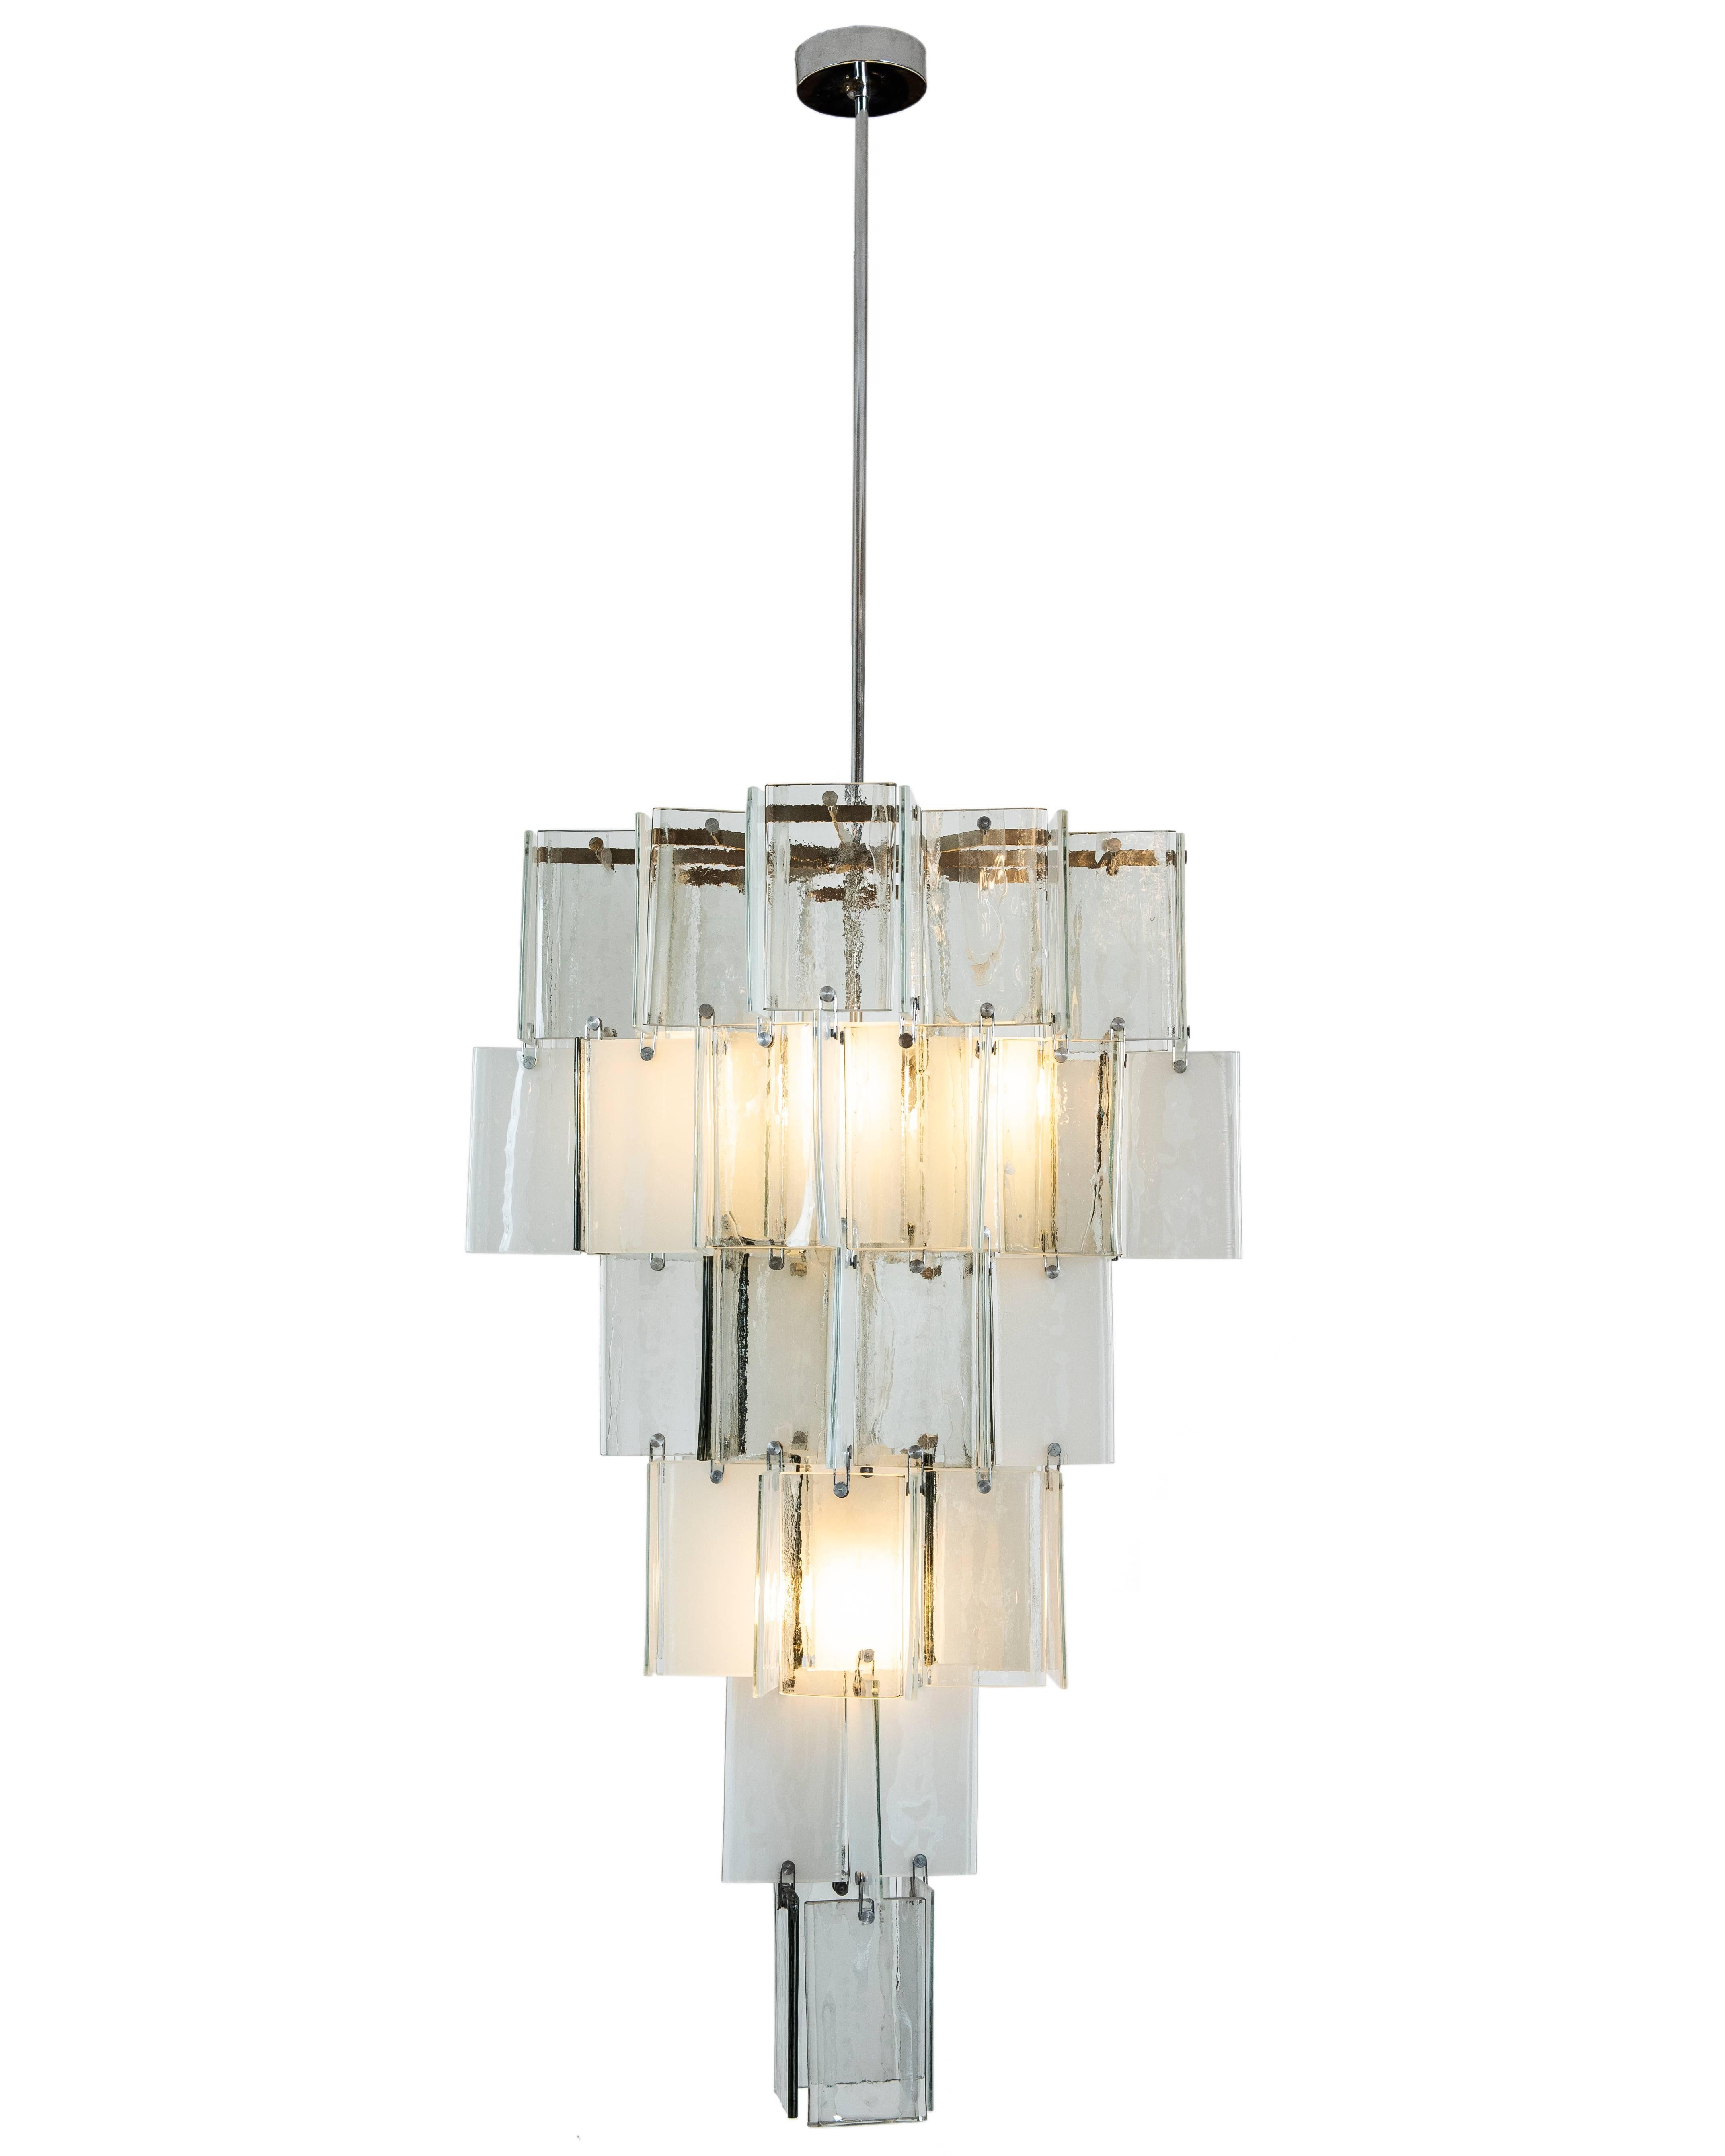 This important and unique Murano light originates from a Toronto home. It was custom-made for the client in the 1970s using handblown opaque clear and white glass pieces attributed to AV Mazzega. The body of fixture with glass measures 48